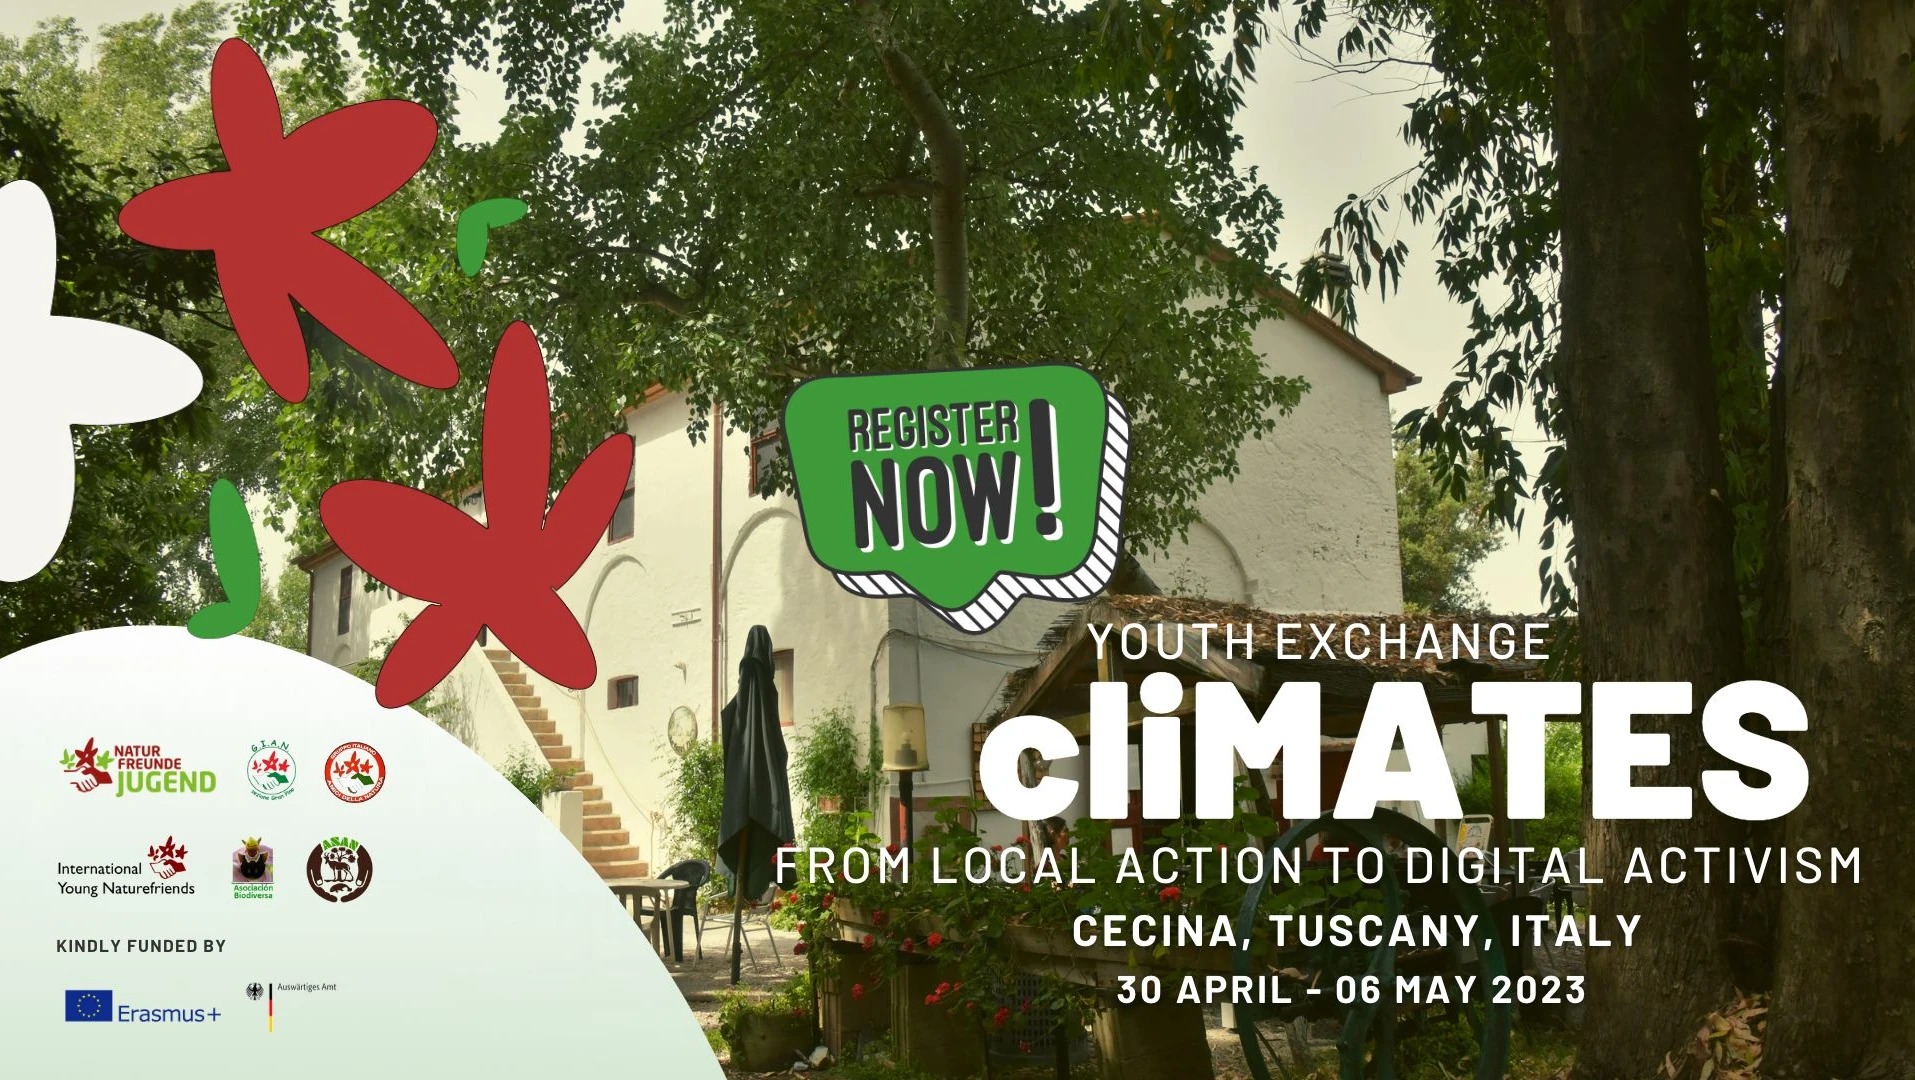 cliMATES - from local action to digital activism